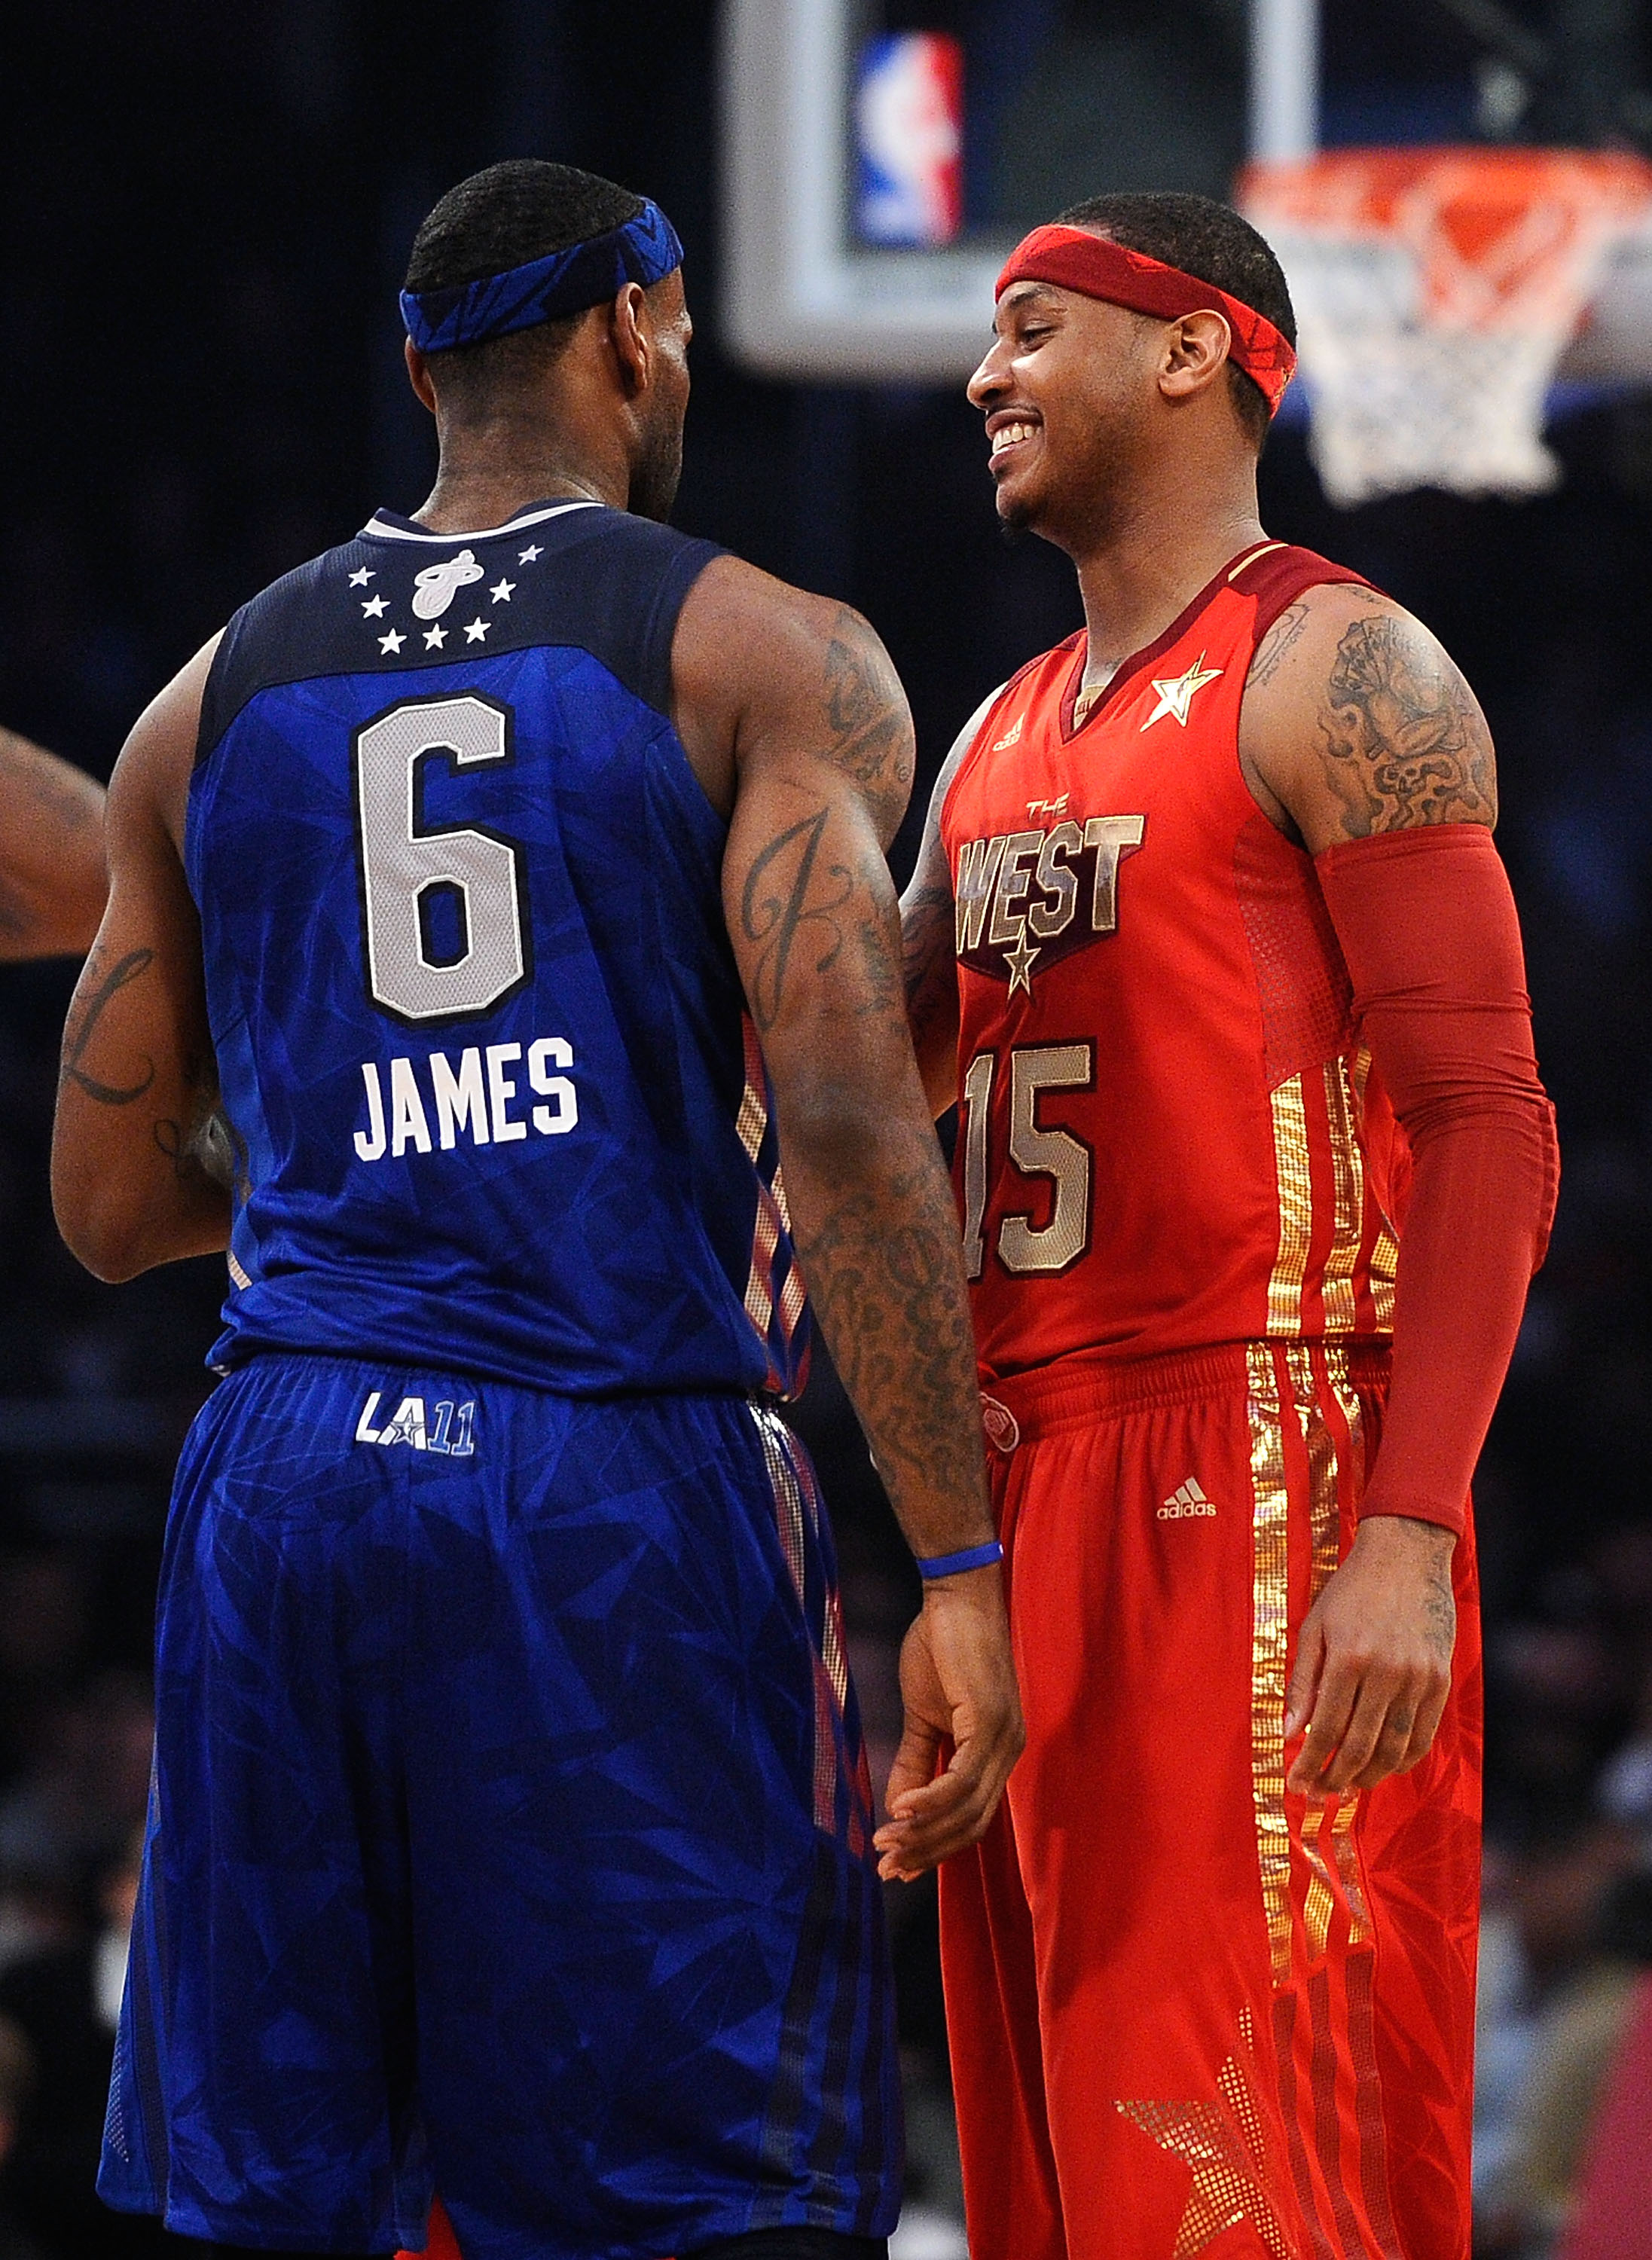 Carmelo Anthony and LeBron James How New York Knicks Match Up vs